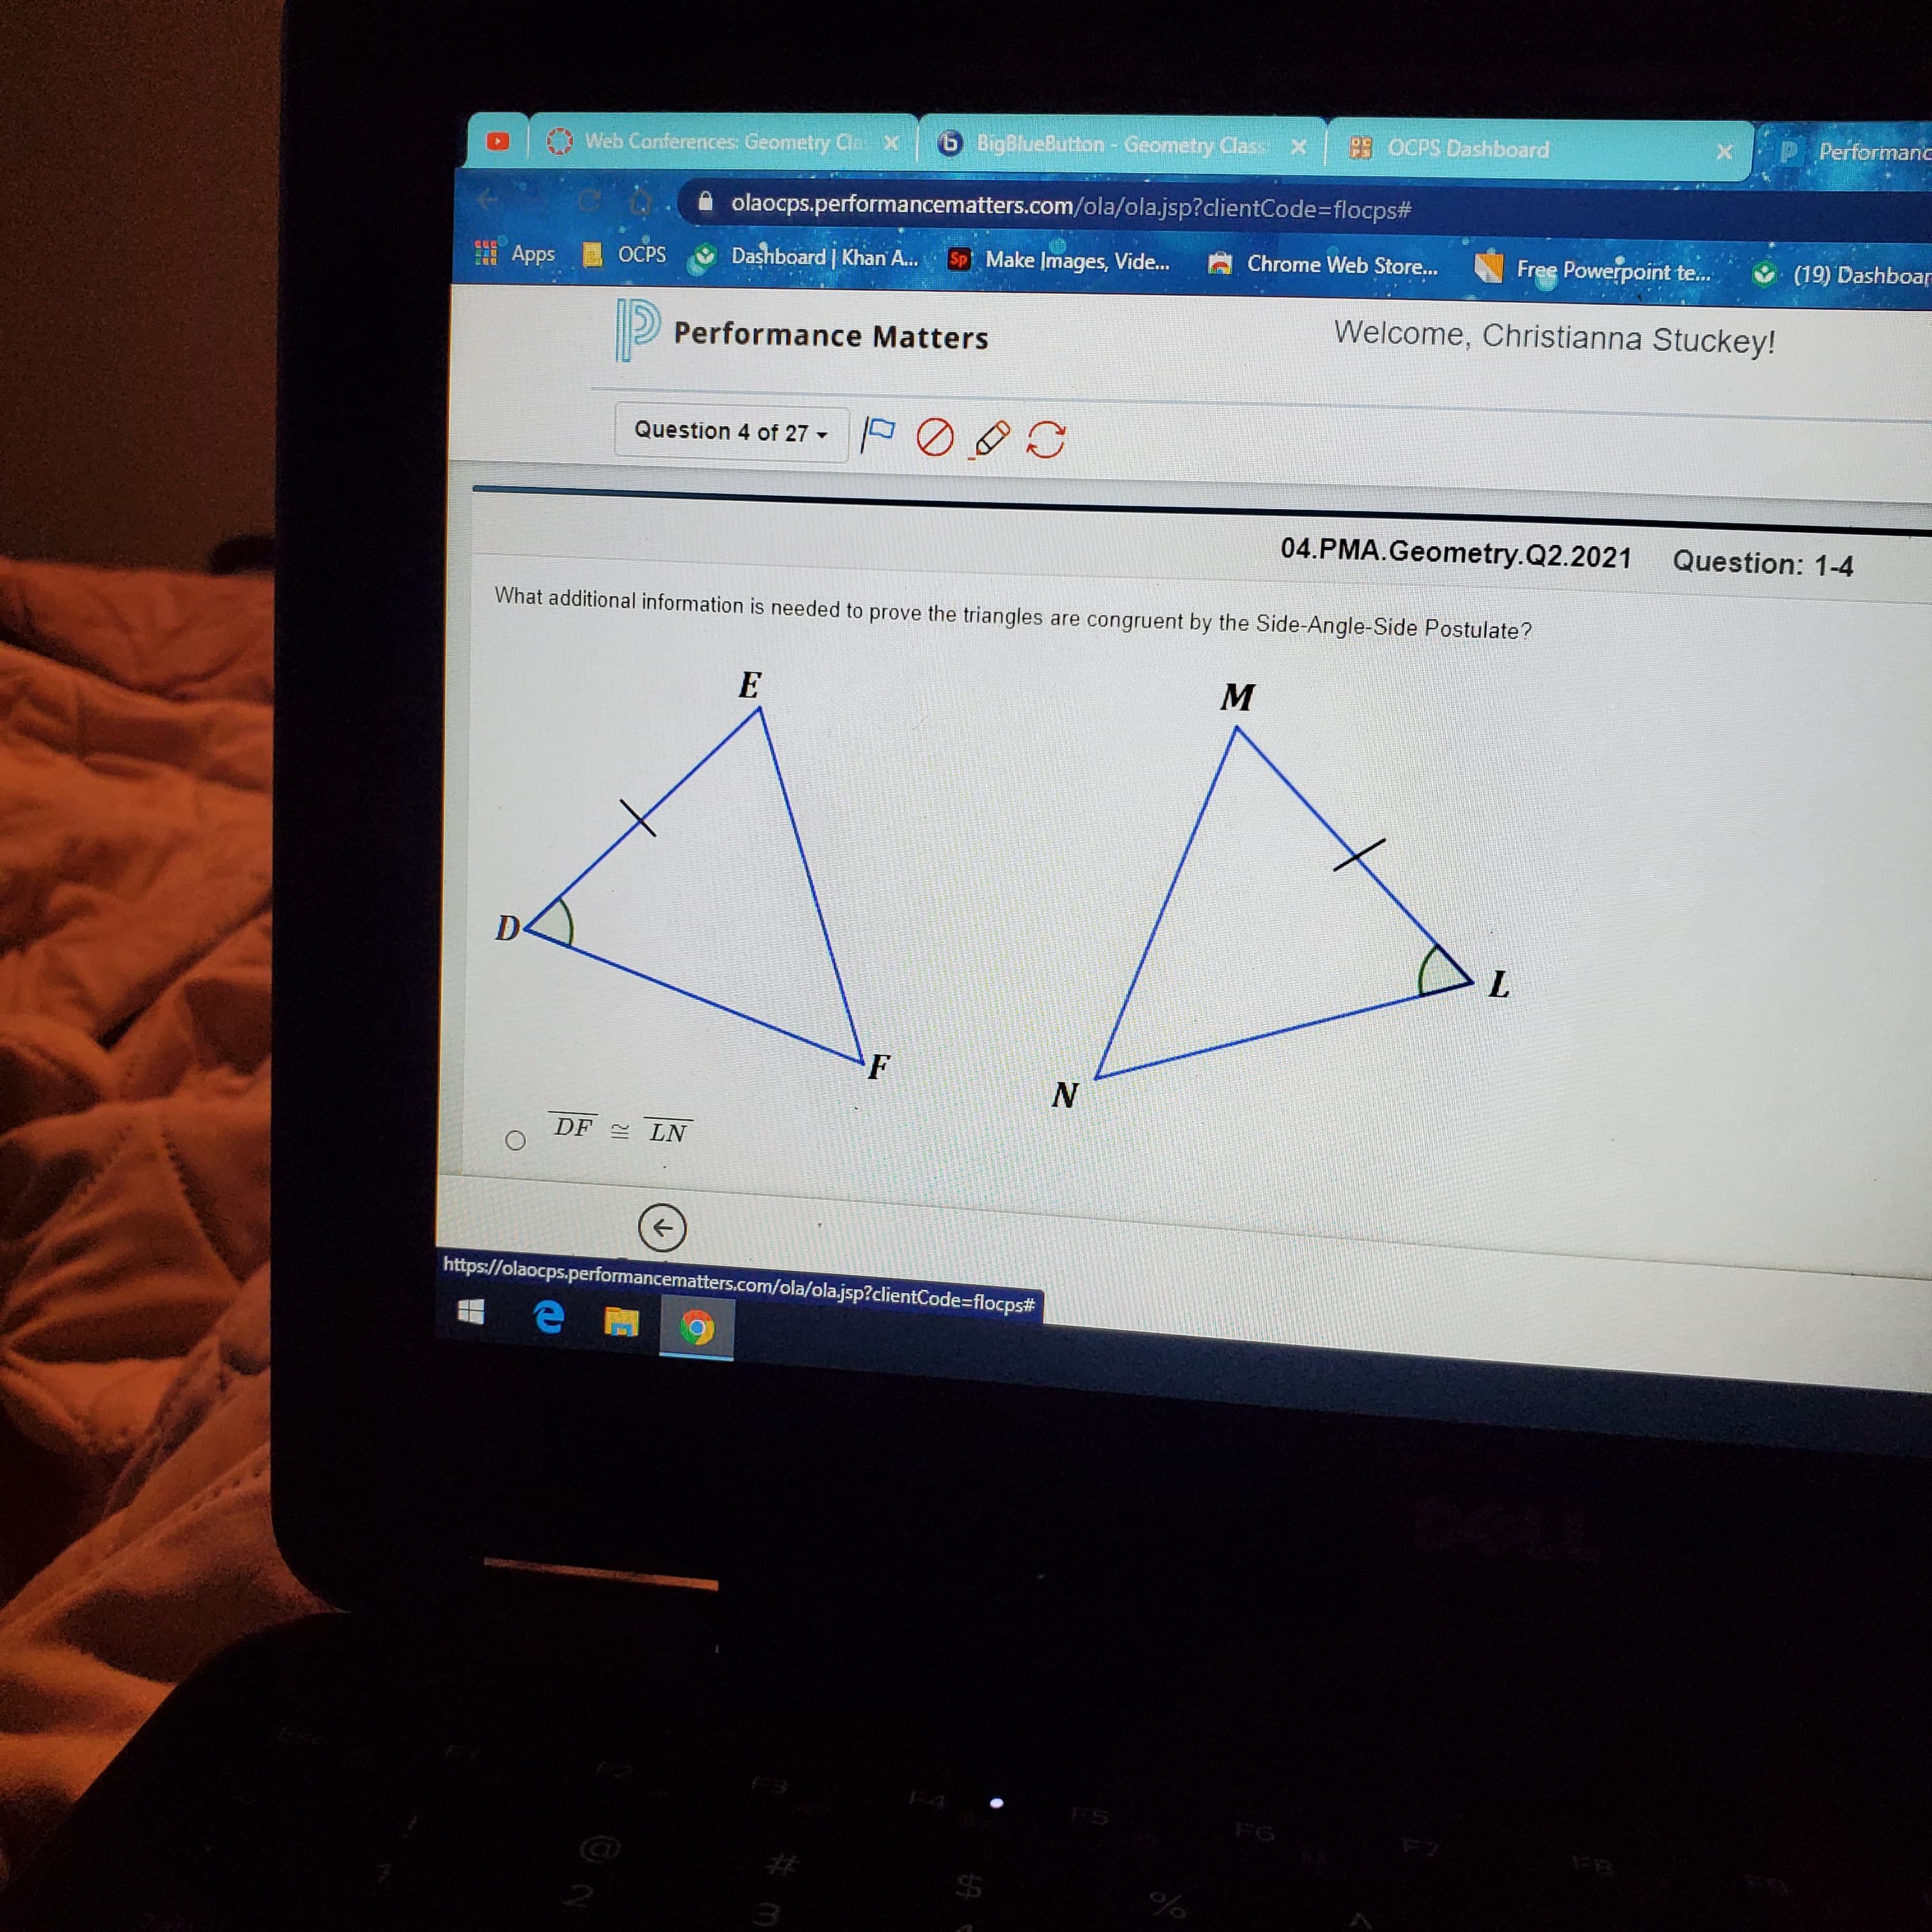 What additional information is needed to prove the triangles are congruent by the Side-Angle-Side Postulate?
E
D-
F
